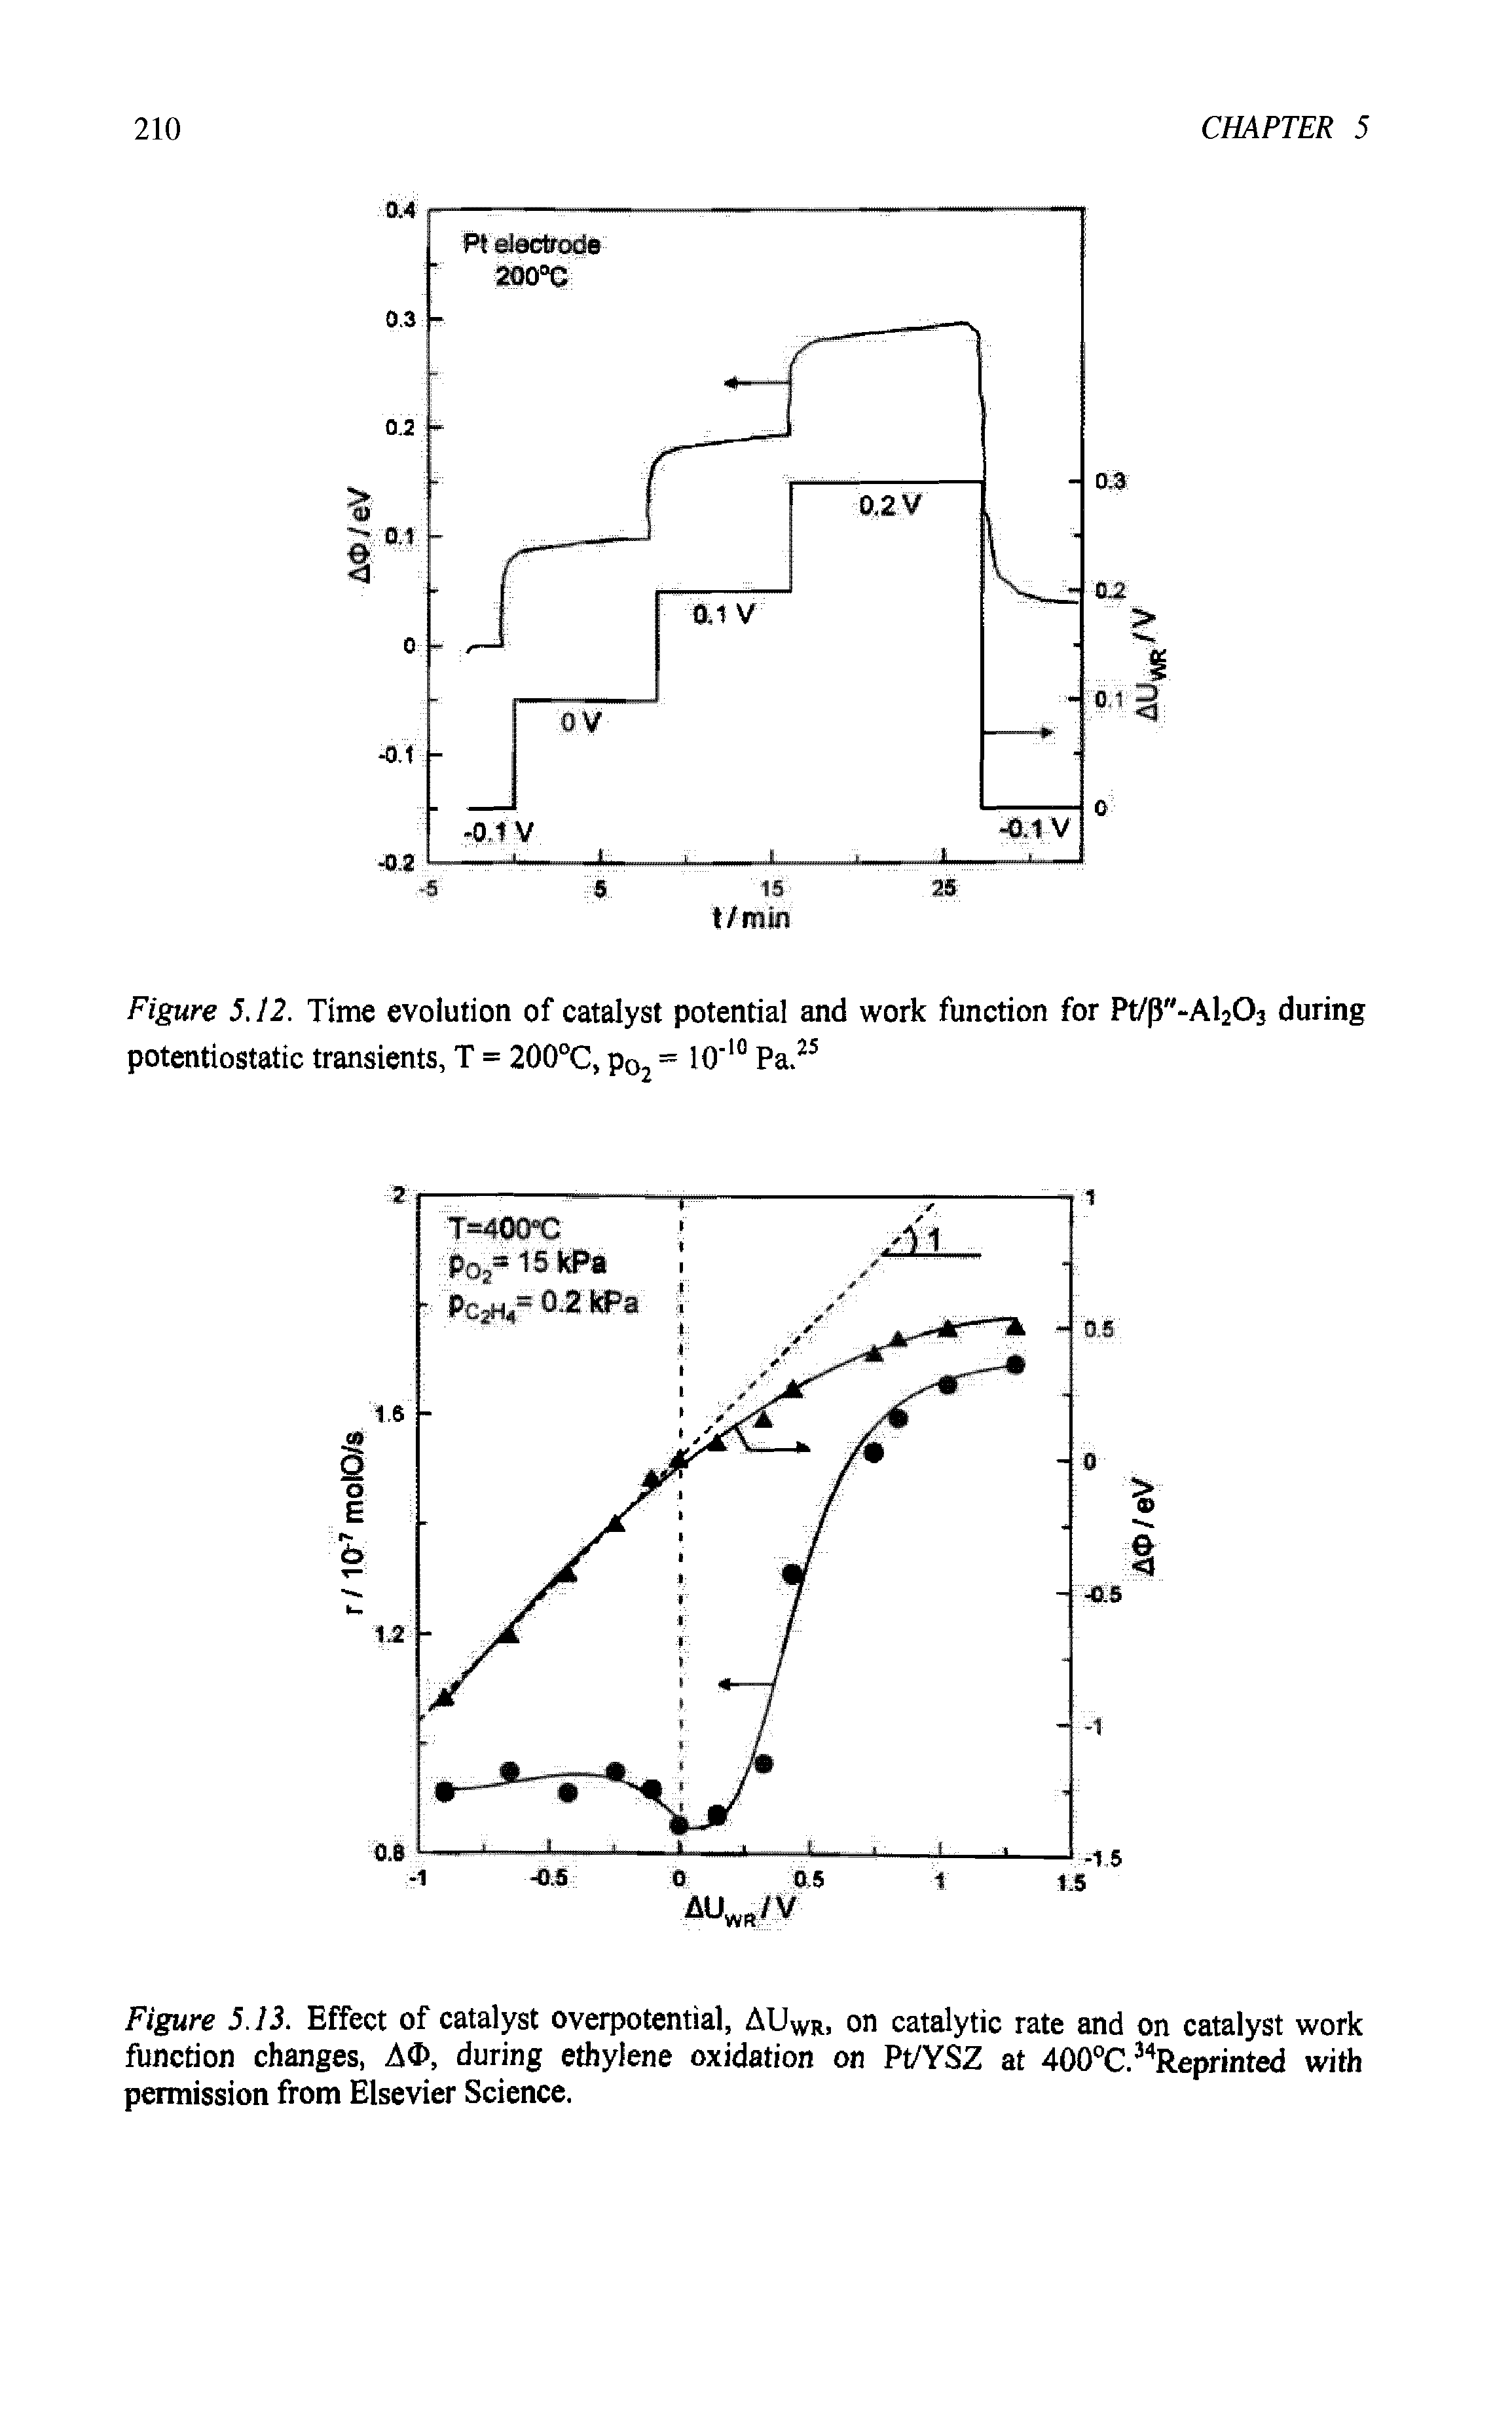 Figure 5.12. Time evolution of catalyst potential and work function for Pt/p"-Al203 during potentiostatic transients, T = 200°C, po2 = 10 10 Pa.25...